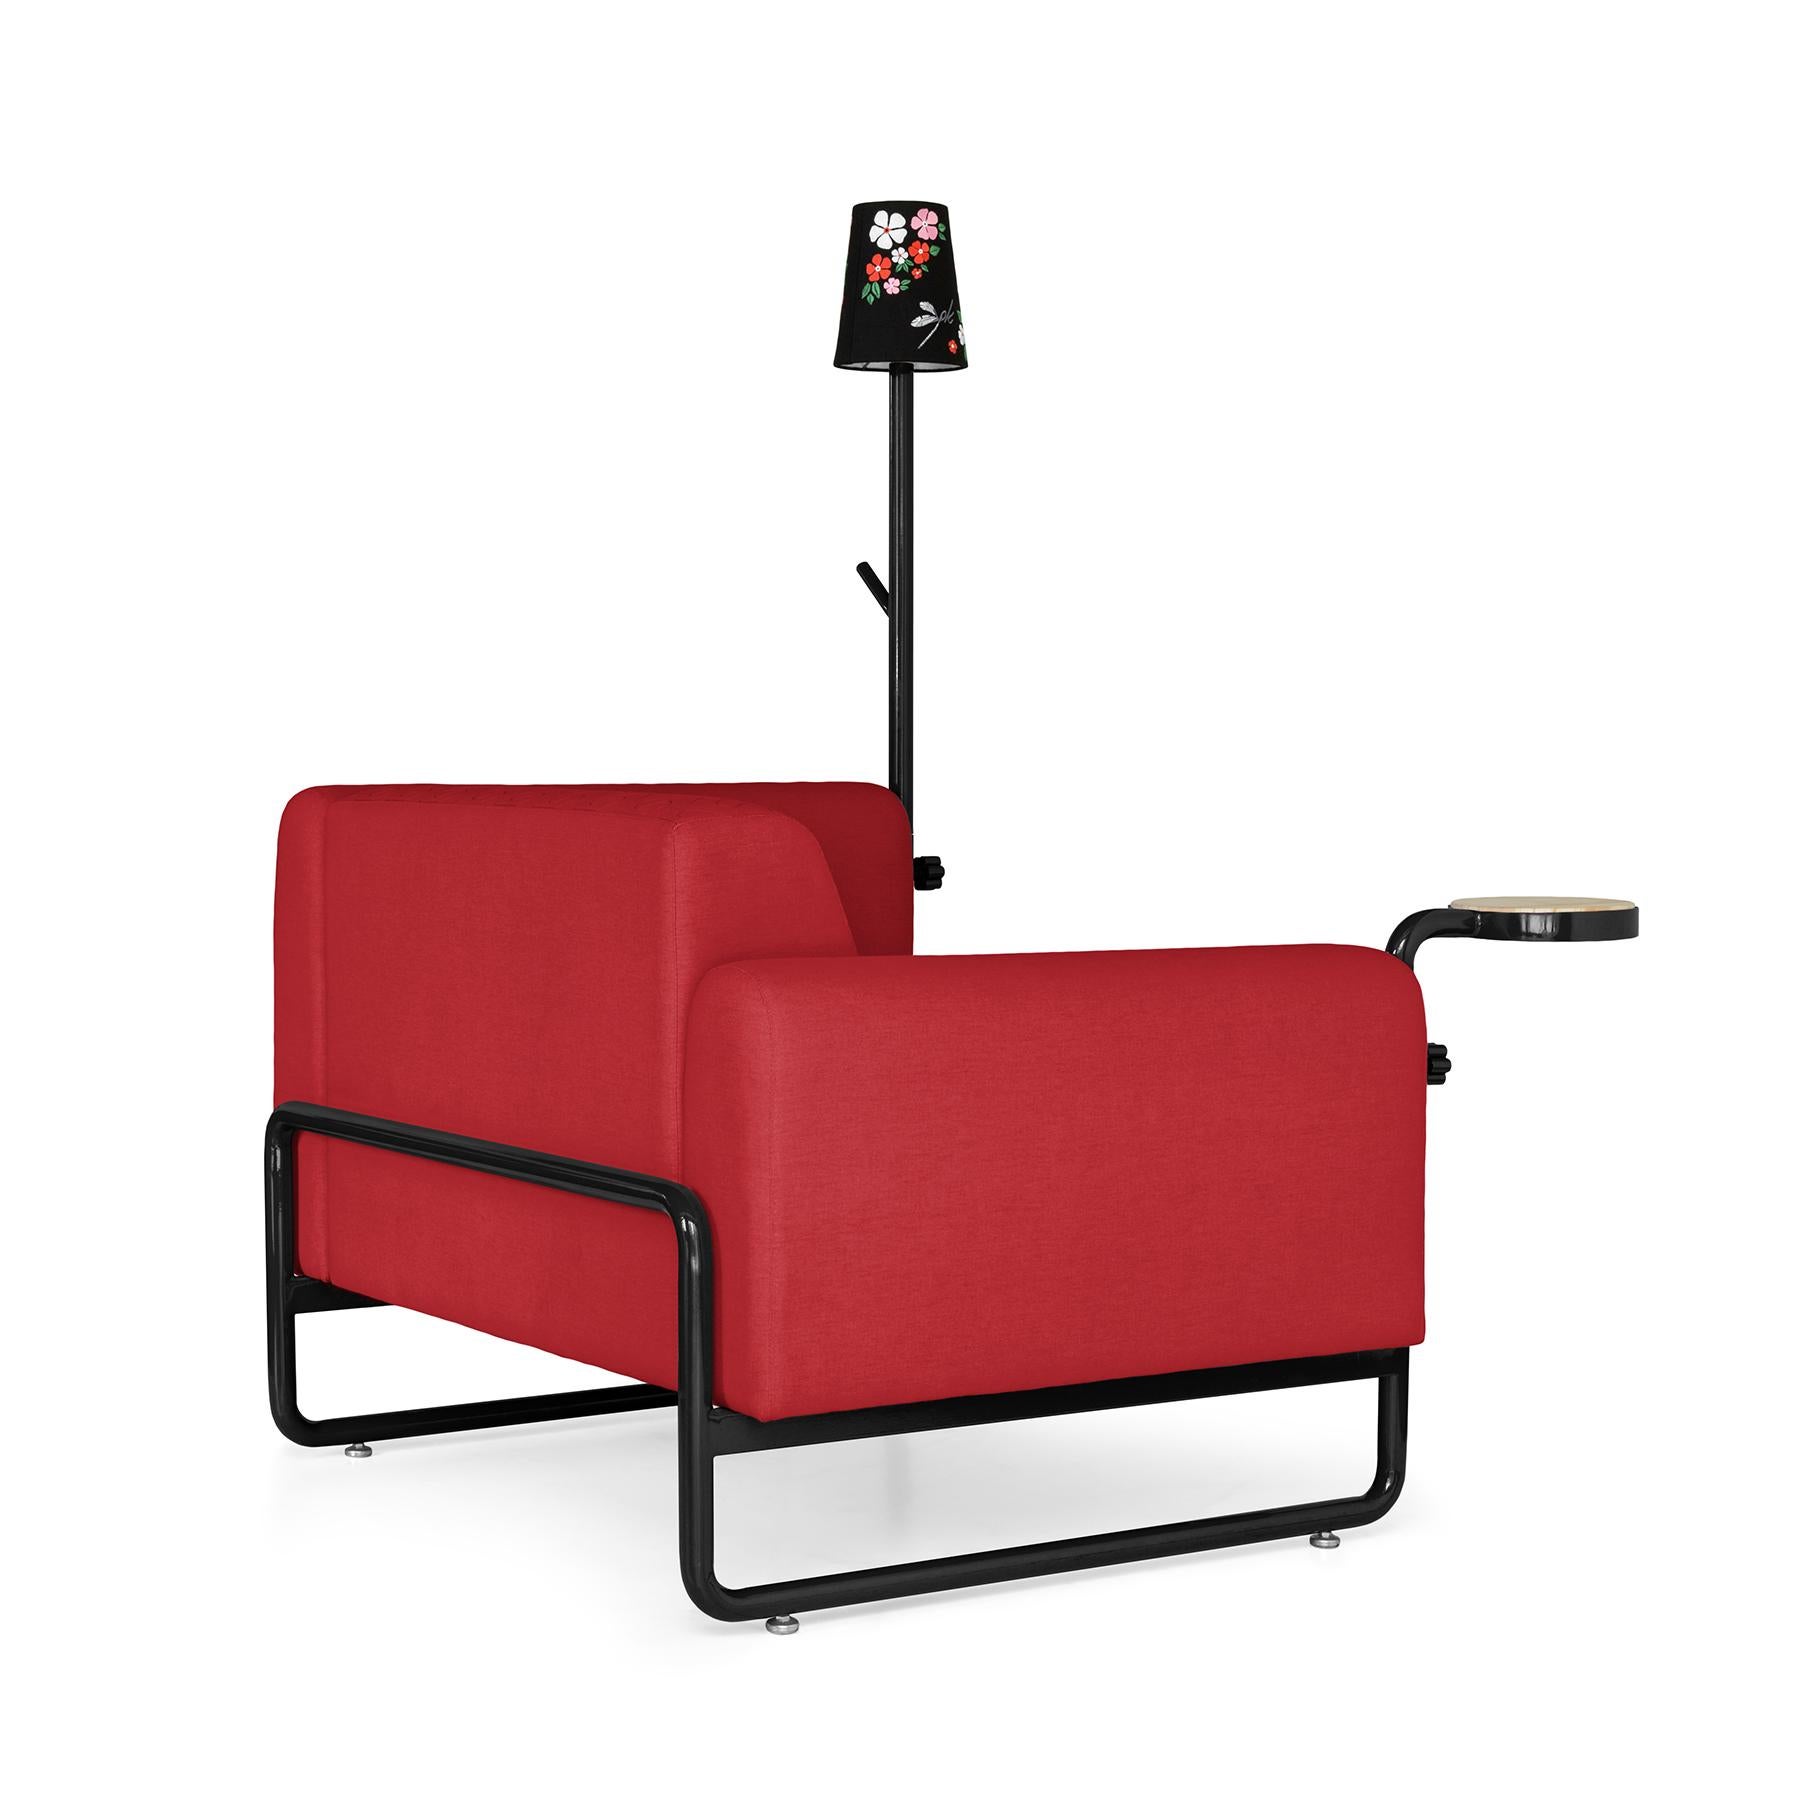 Brazilian Red PK8 Armchair, Seat & Lamp Hybrid, Handmade Metal Structure by Paulo Kobylka For Sale